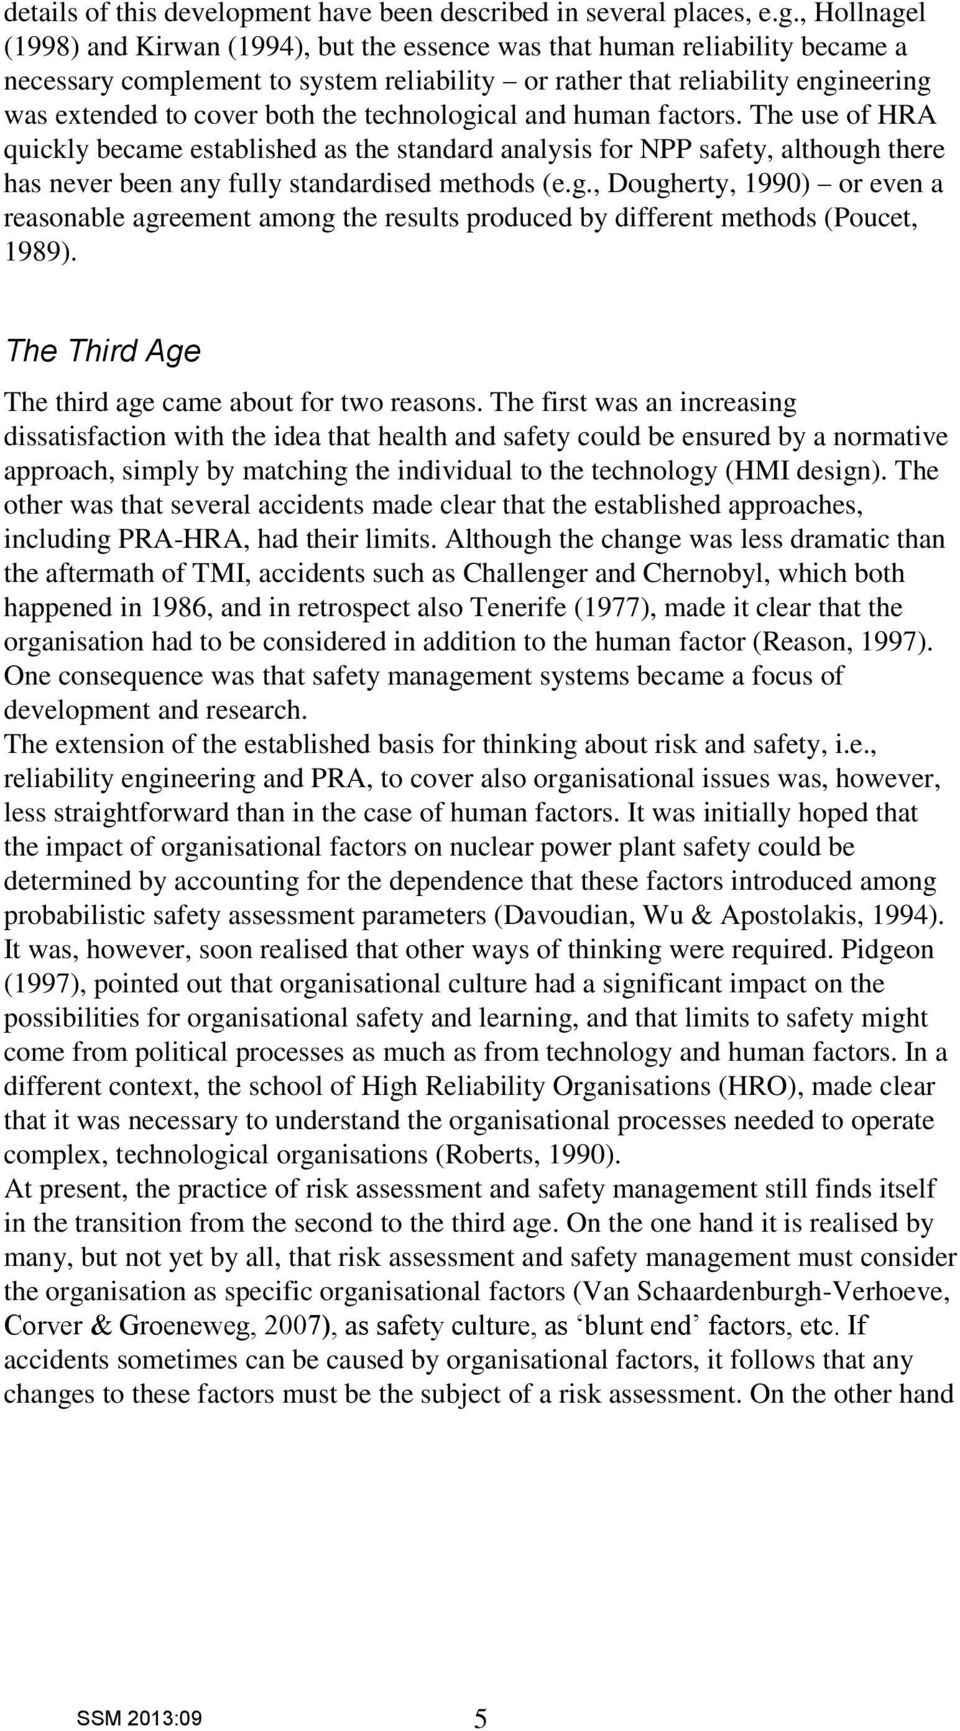 the technological and human factors. The use of HRA quickly became established as the standard analysis for NPP safety, although there has never been any fully standardised methods (e.g., Dougherty, 1990) or even a reasonable agreement among the results produced by different methods (Poucet, 1989).